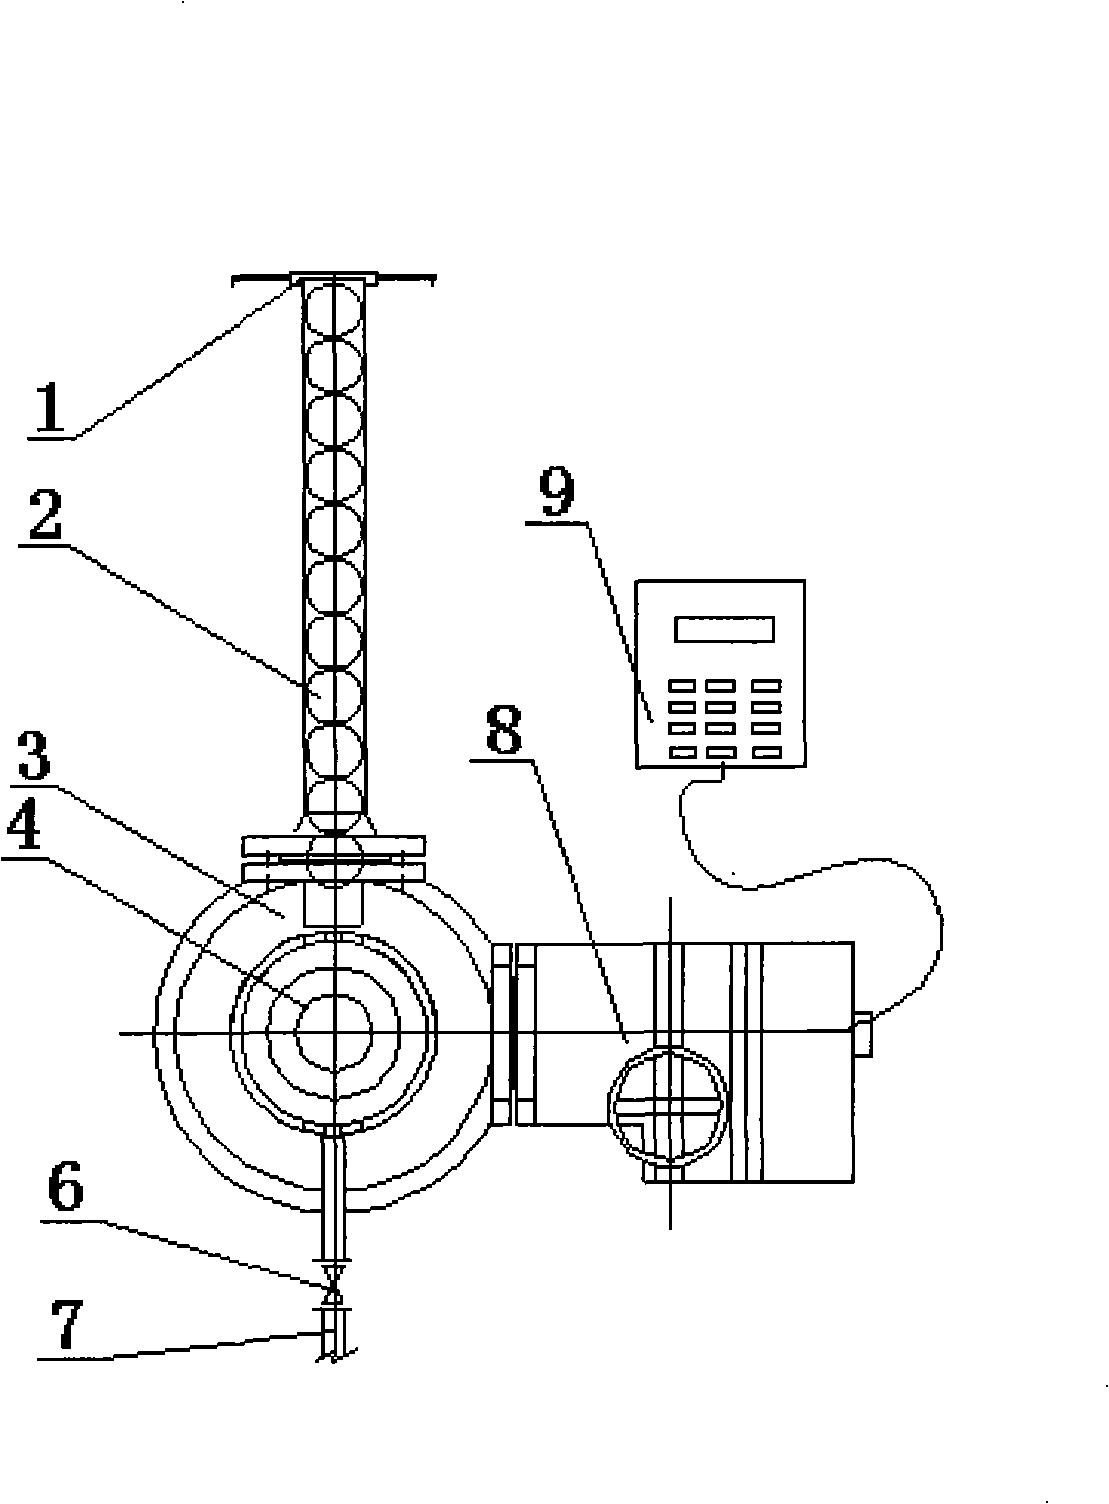 Timing automatic ball-throwing apparatus and method